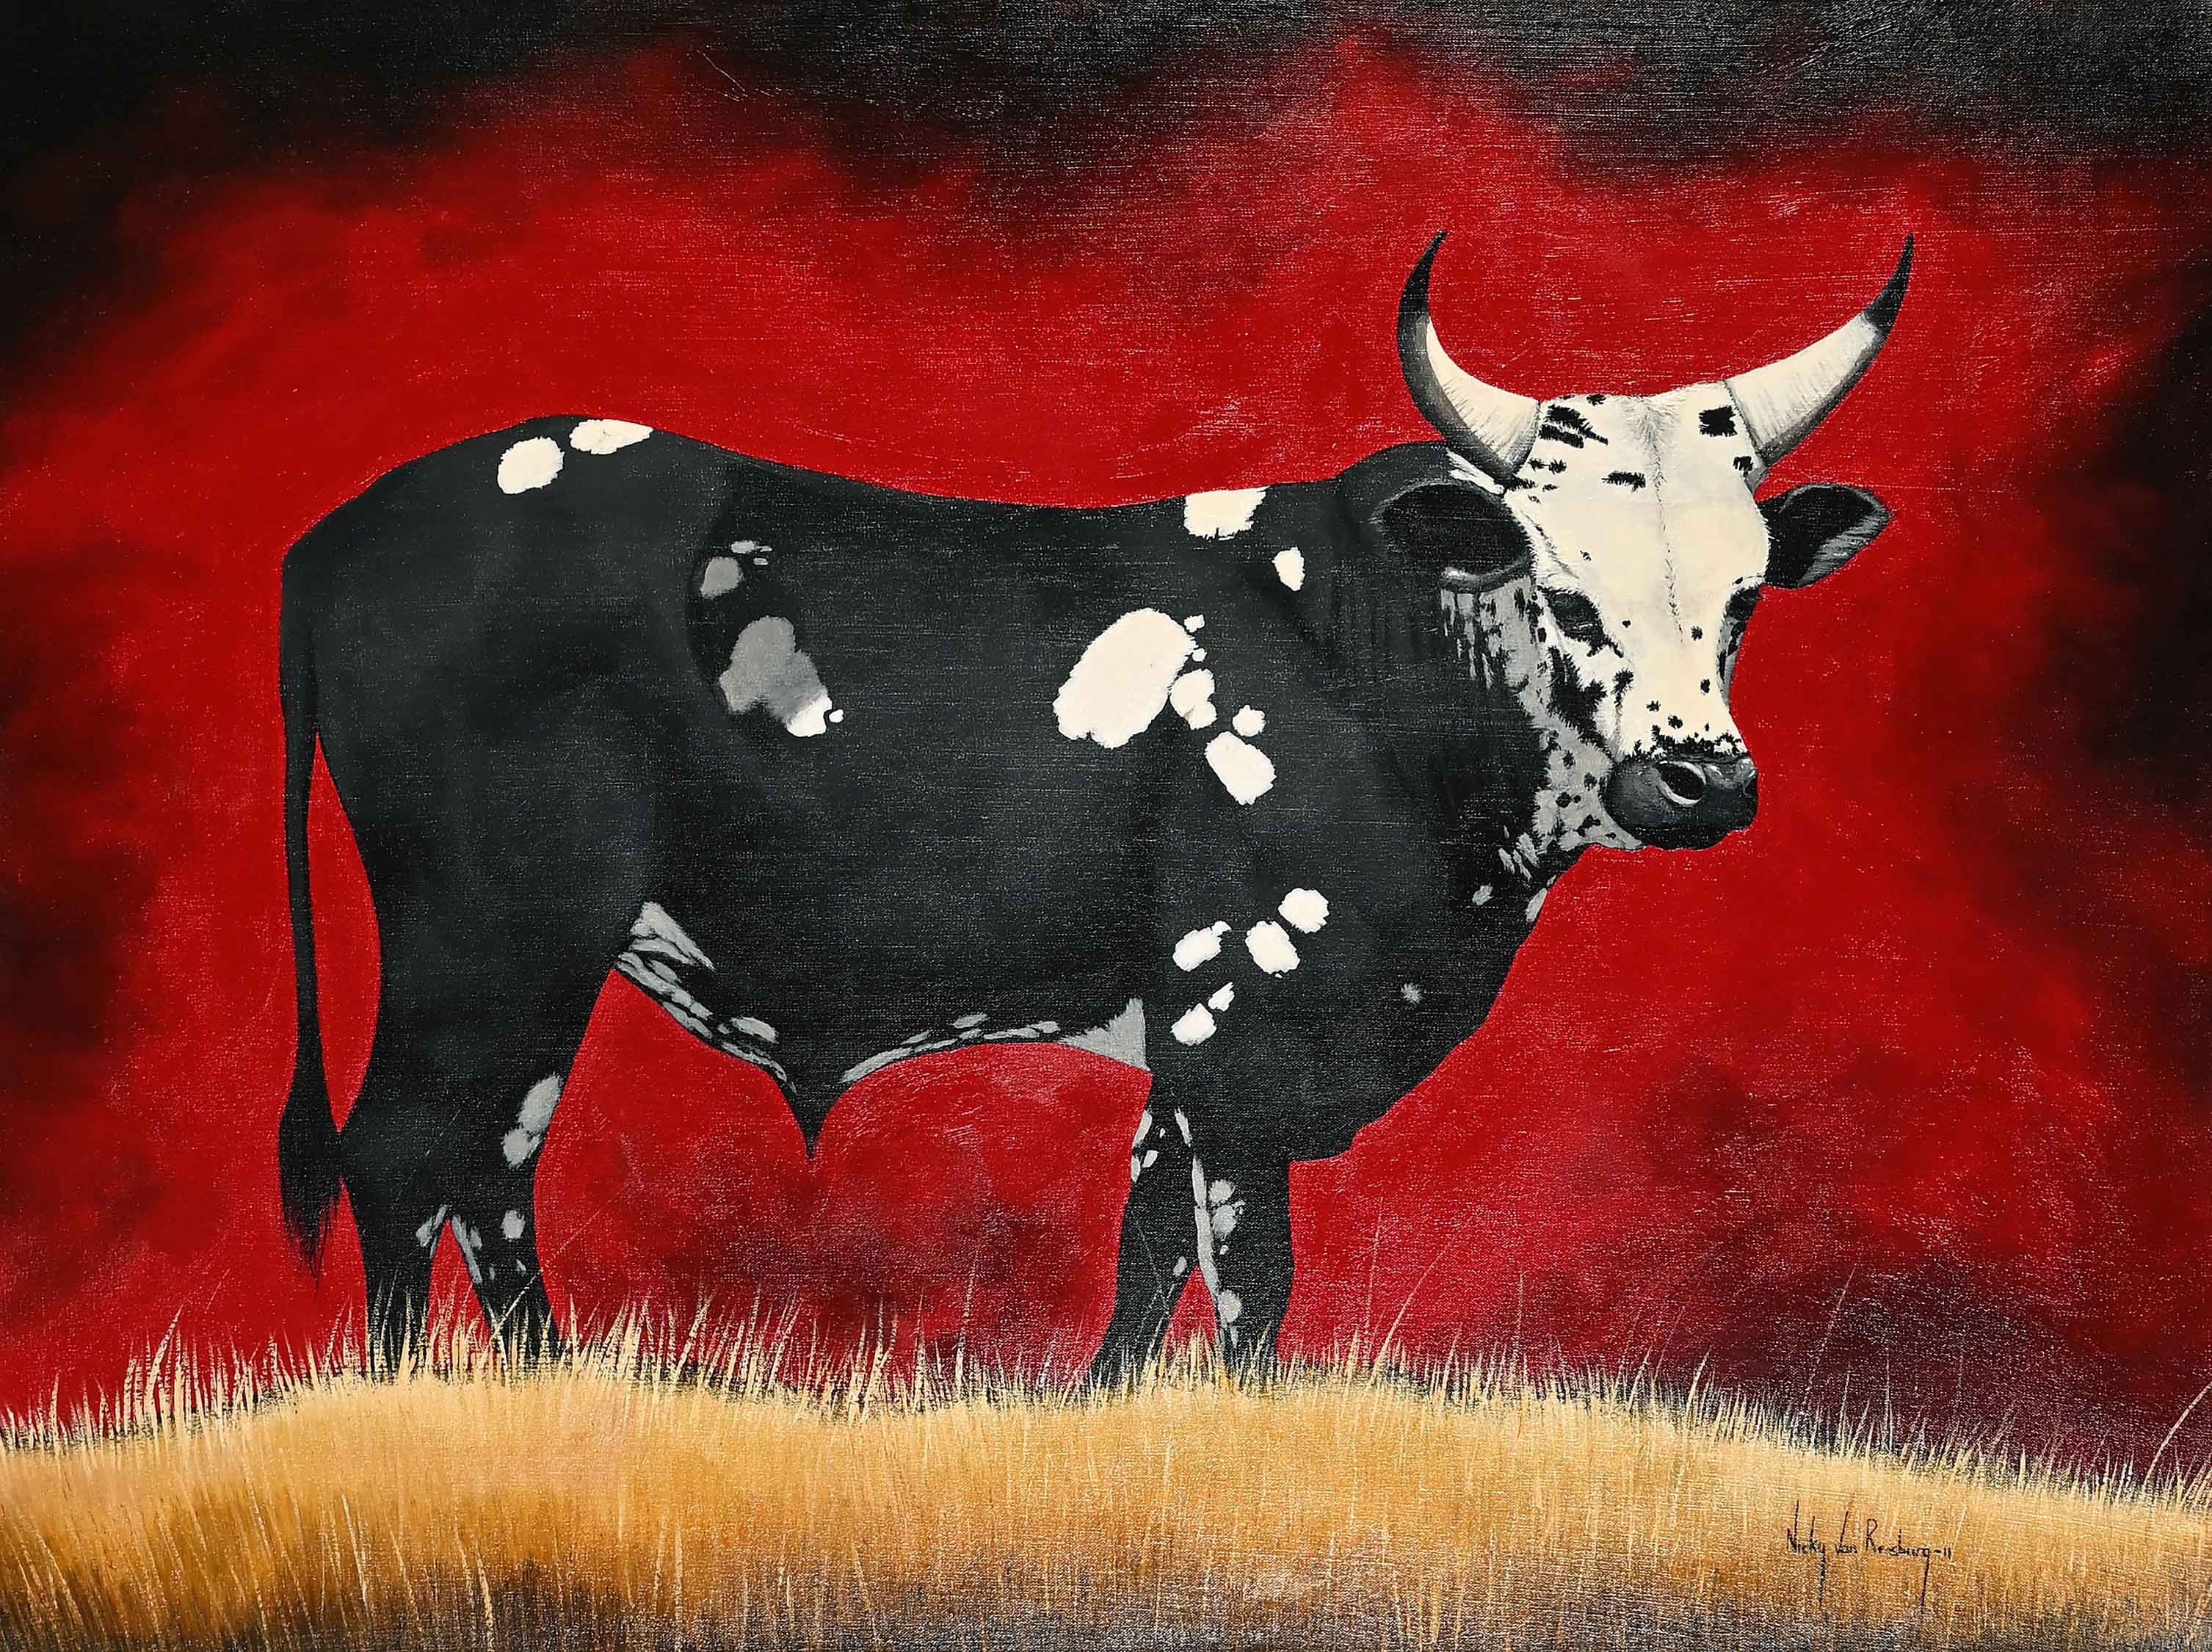 Artwork by Nicky van Rensburg, Nguni Cattle, Made of oil on canvas